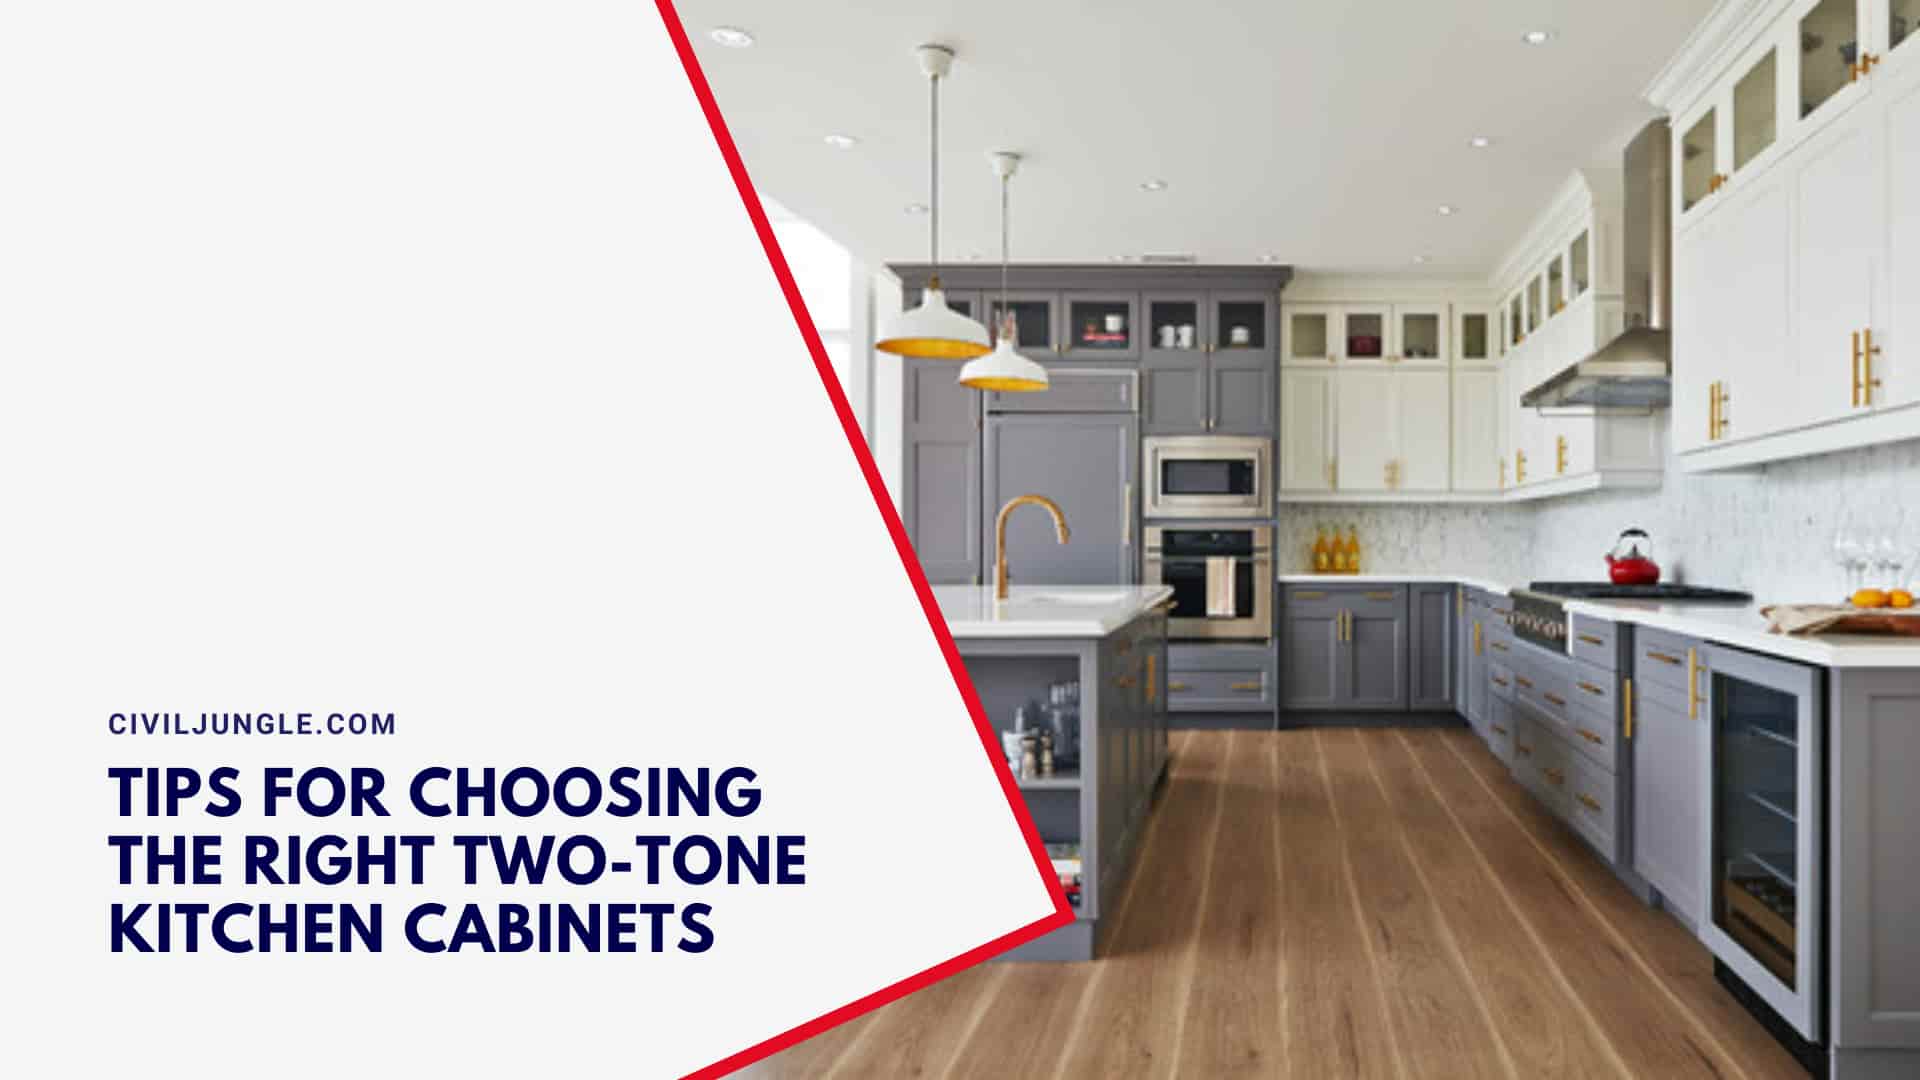 Tips for Choosing the Right Two-Tone Kitchen Cabinets